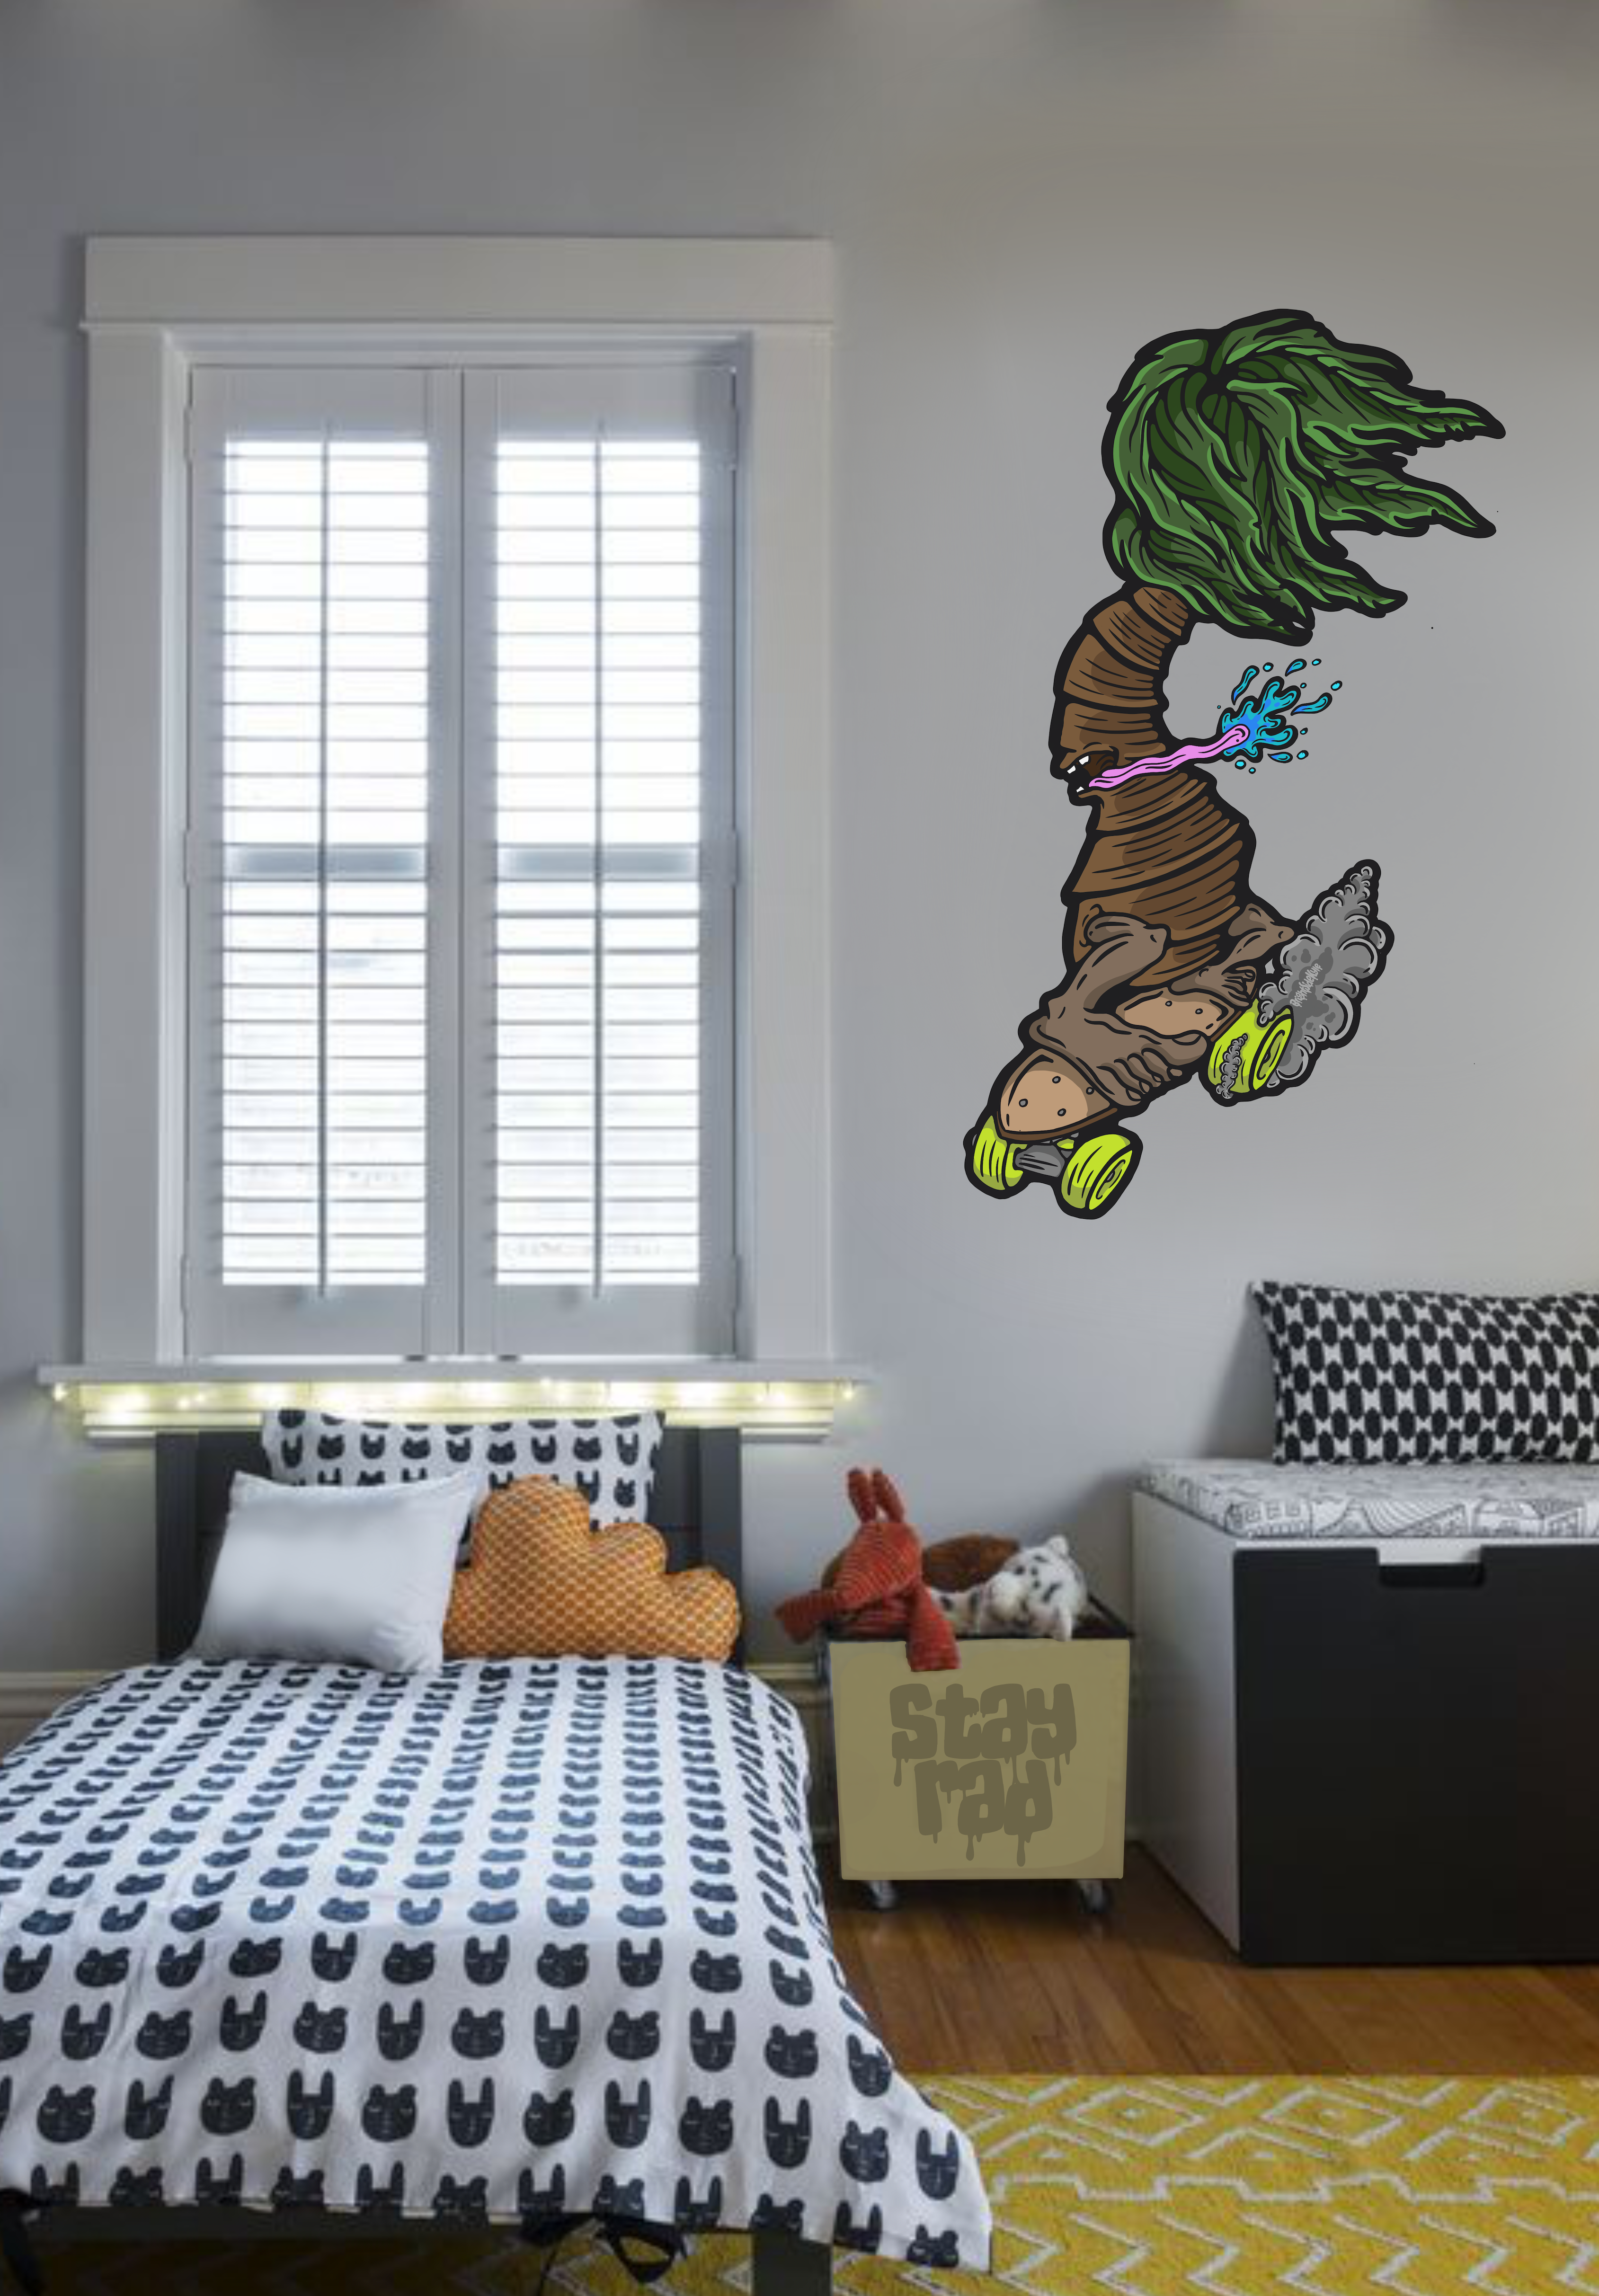 Wall Art Decal - Skater Palm Tree